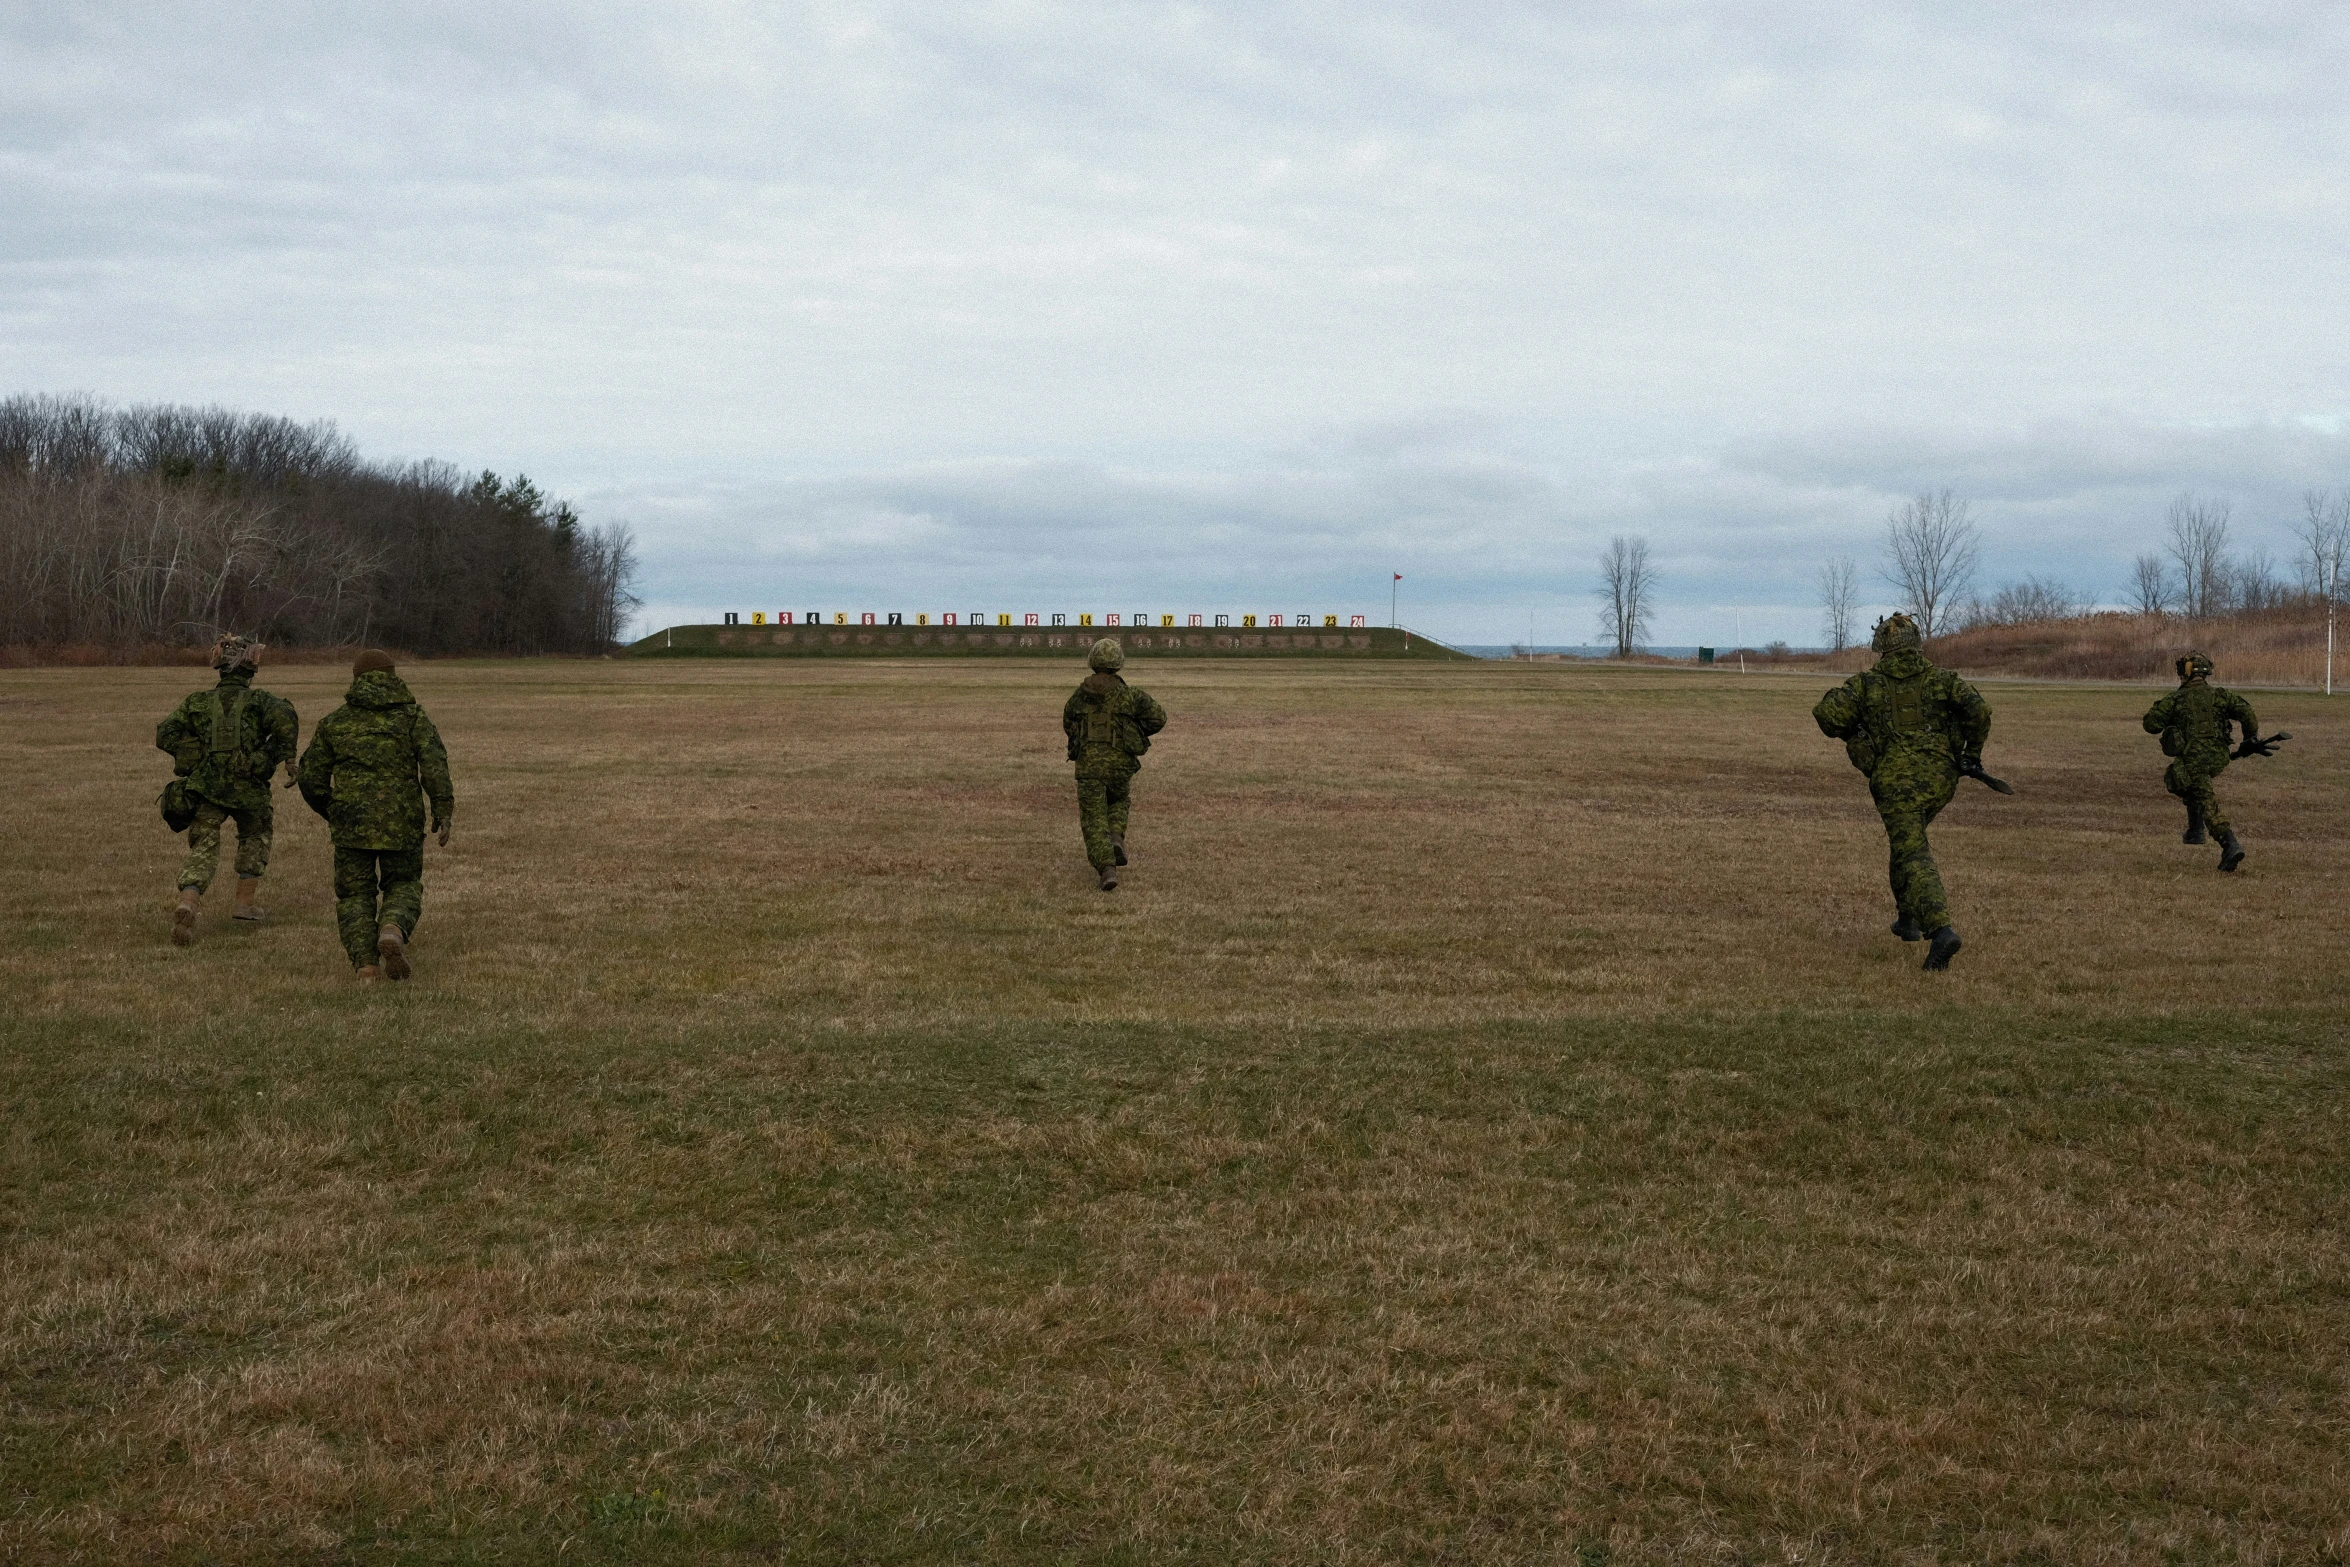 soldiers run through the grass to the military band